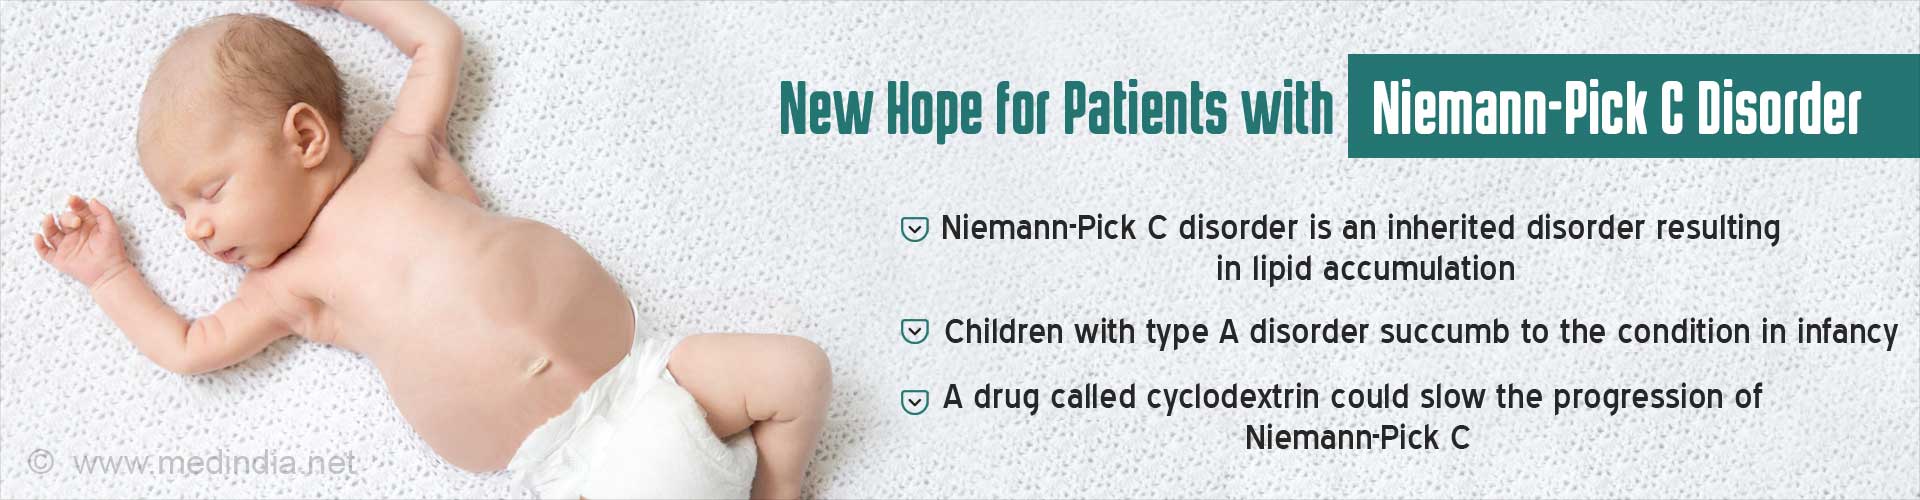 New Hope for Patients with Niemann-Pick C Disorder
- Niemann-Pick C disorder is an inherited disorder resulting in lipid accumulation
- Children with type A disorder succumd to the condition in infancy
- A drug called cyclodextrin could slow the progression of Niemann-Pick C Disorder
